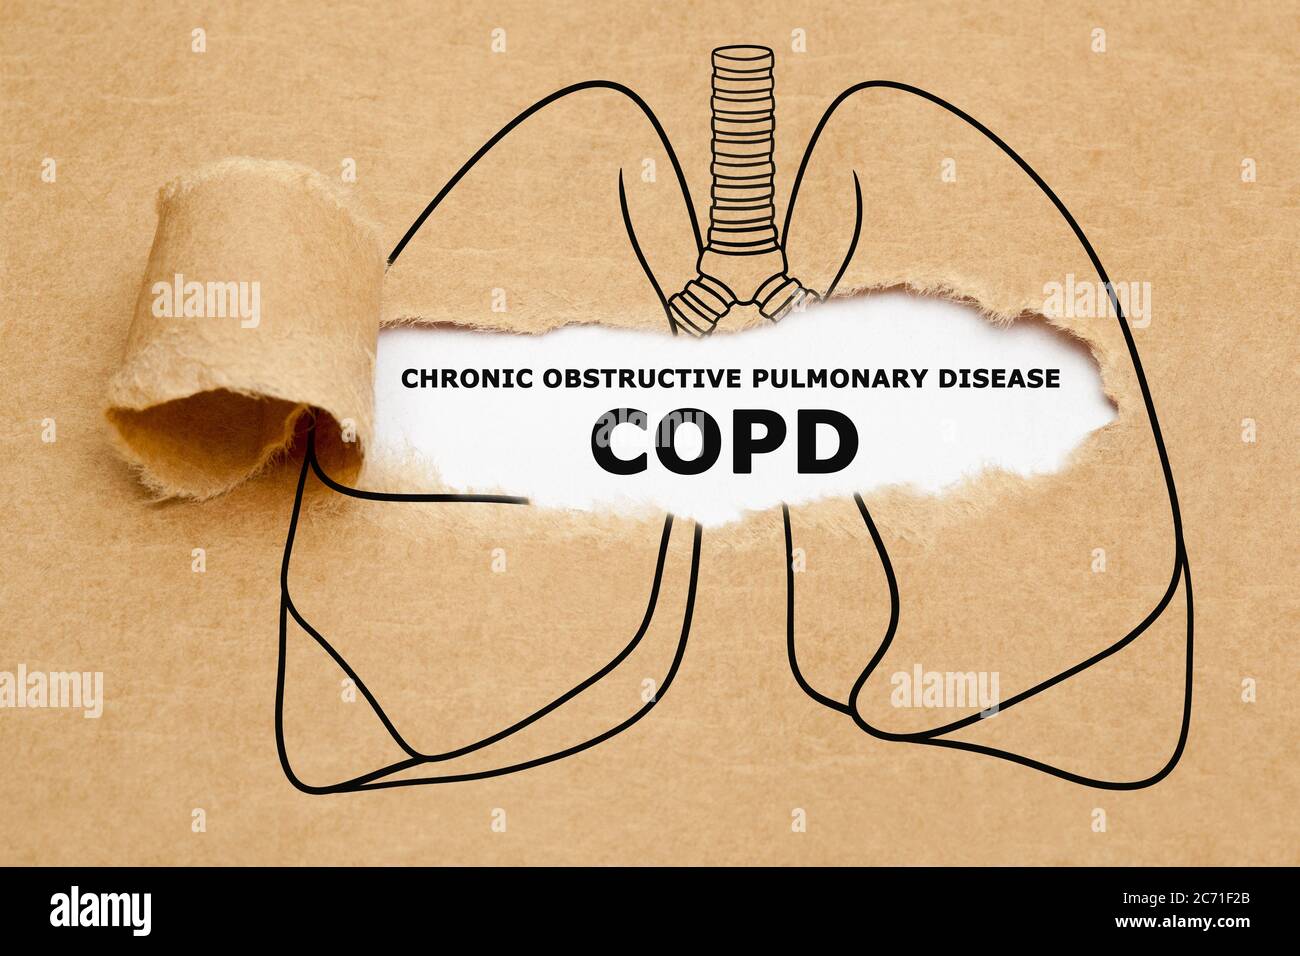 Text Chronic Obstructive Pulmonary Disease COPD appearing behind torn brown paper in human lungs drawing. Stock Photo